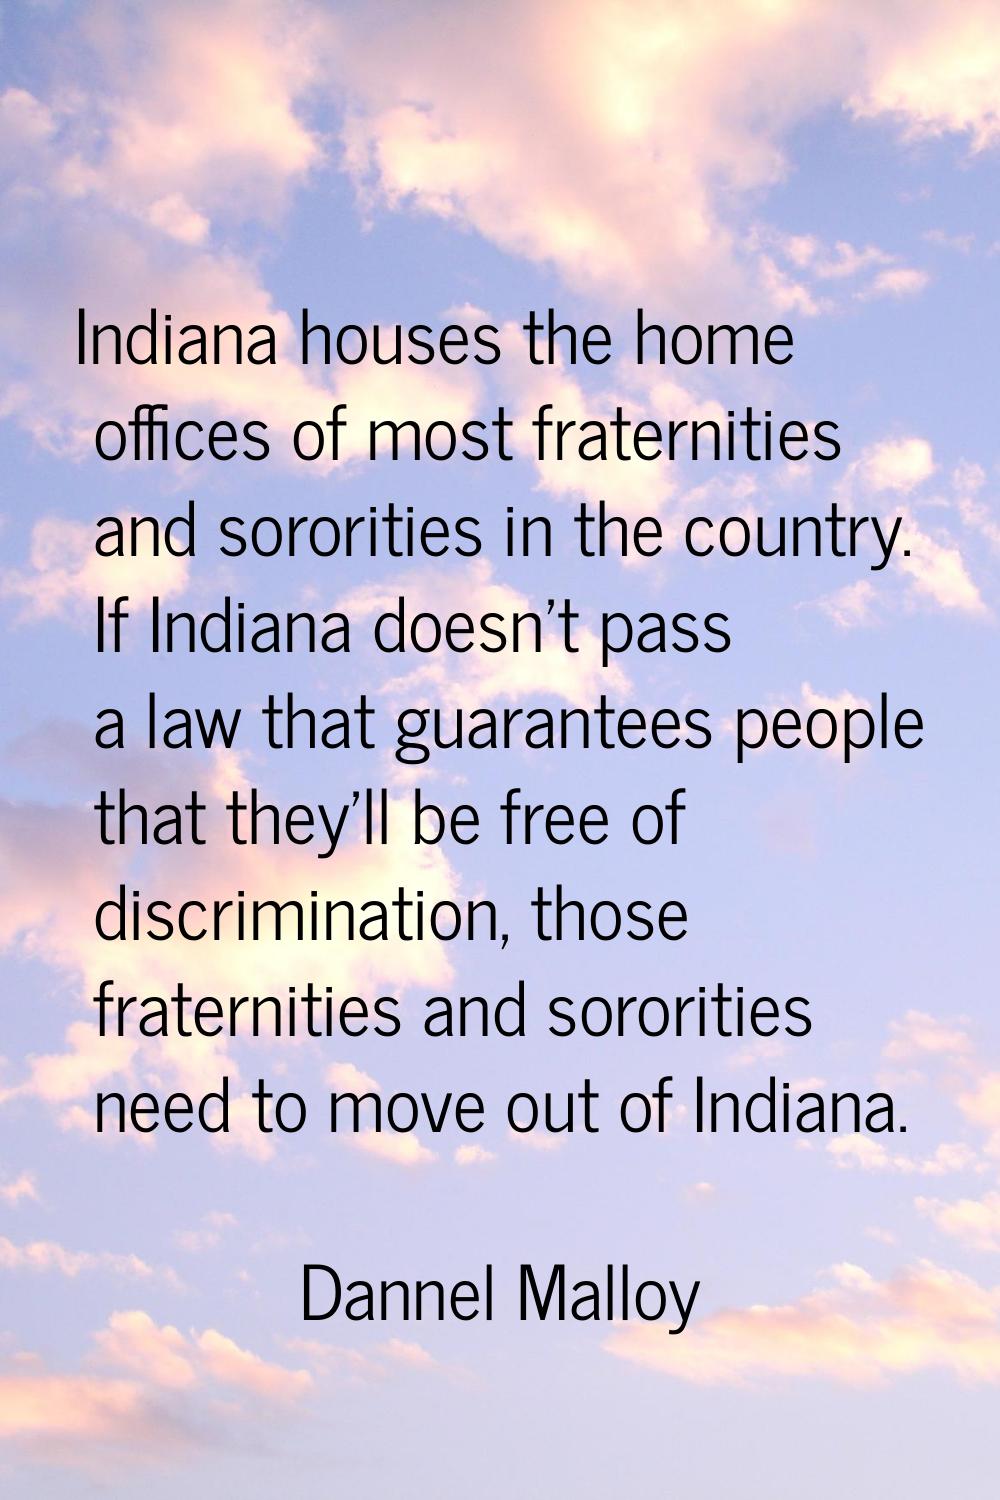 Indiana houses the home offices of most fraternities and sororities in the country. If Indiana does